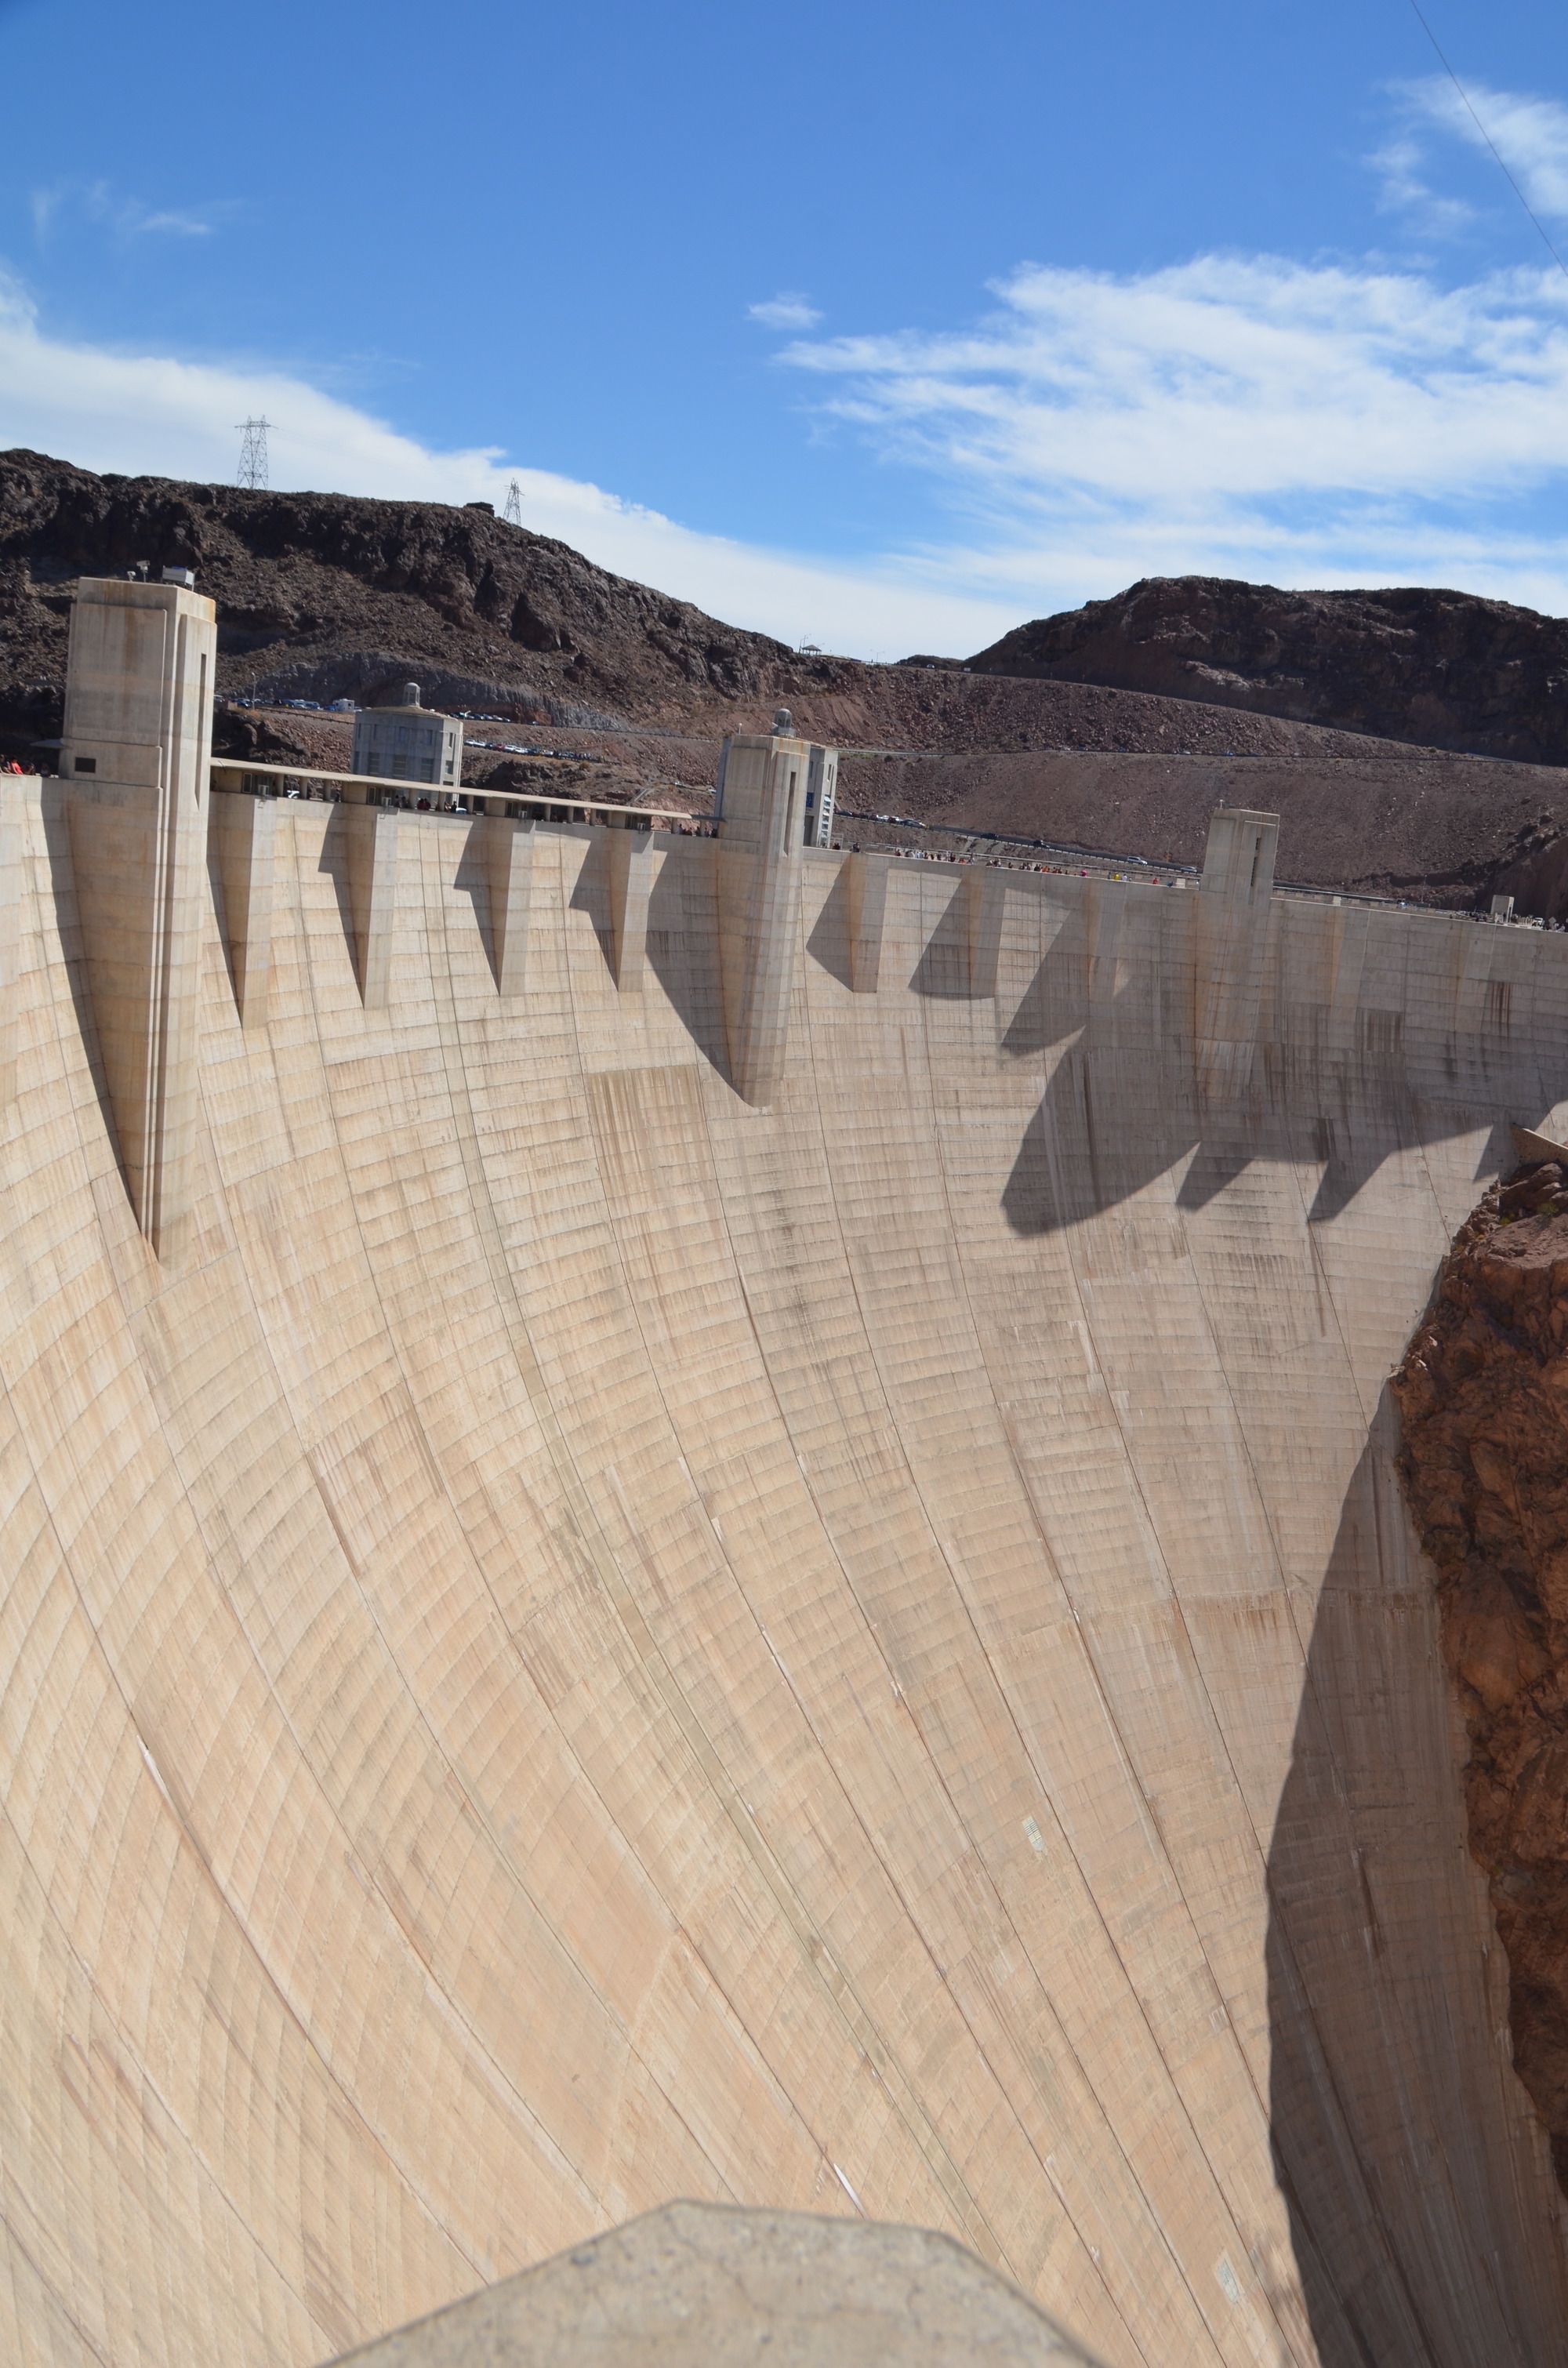 Visiting Hoover Dam